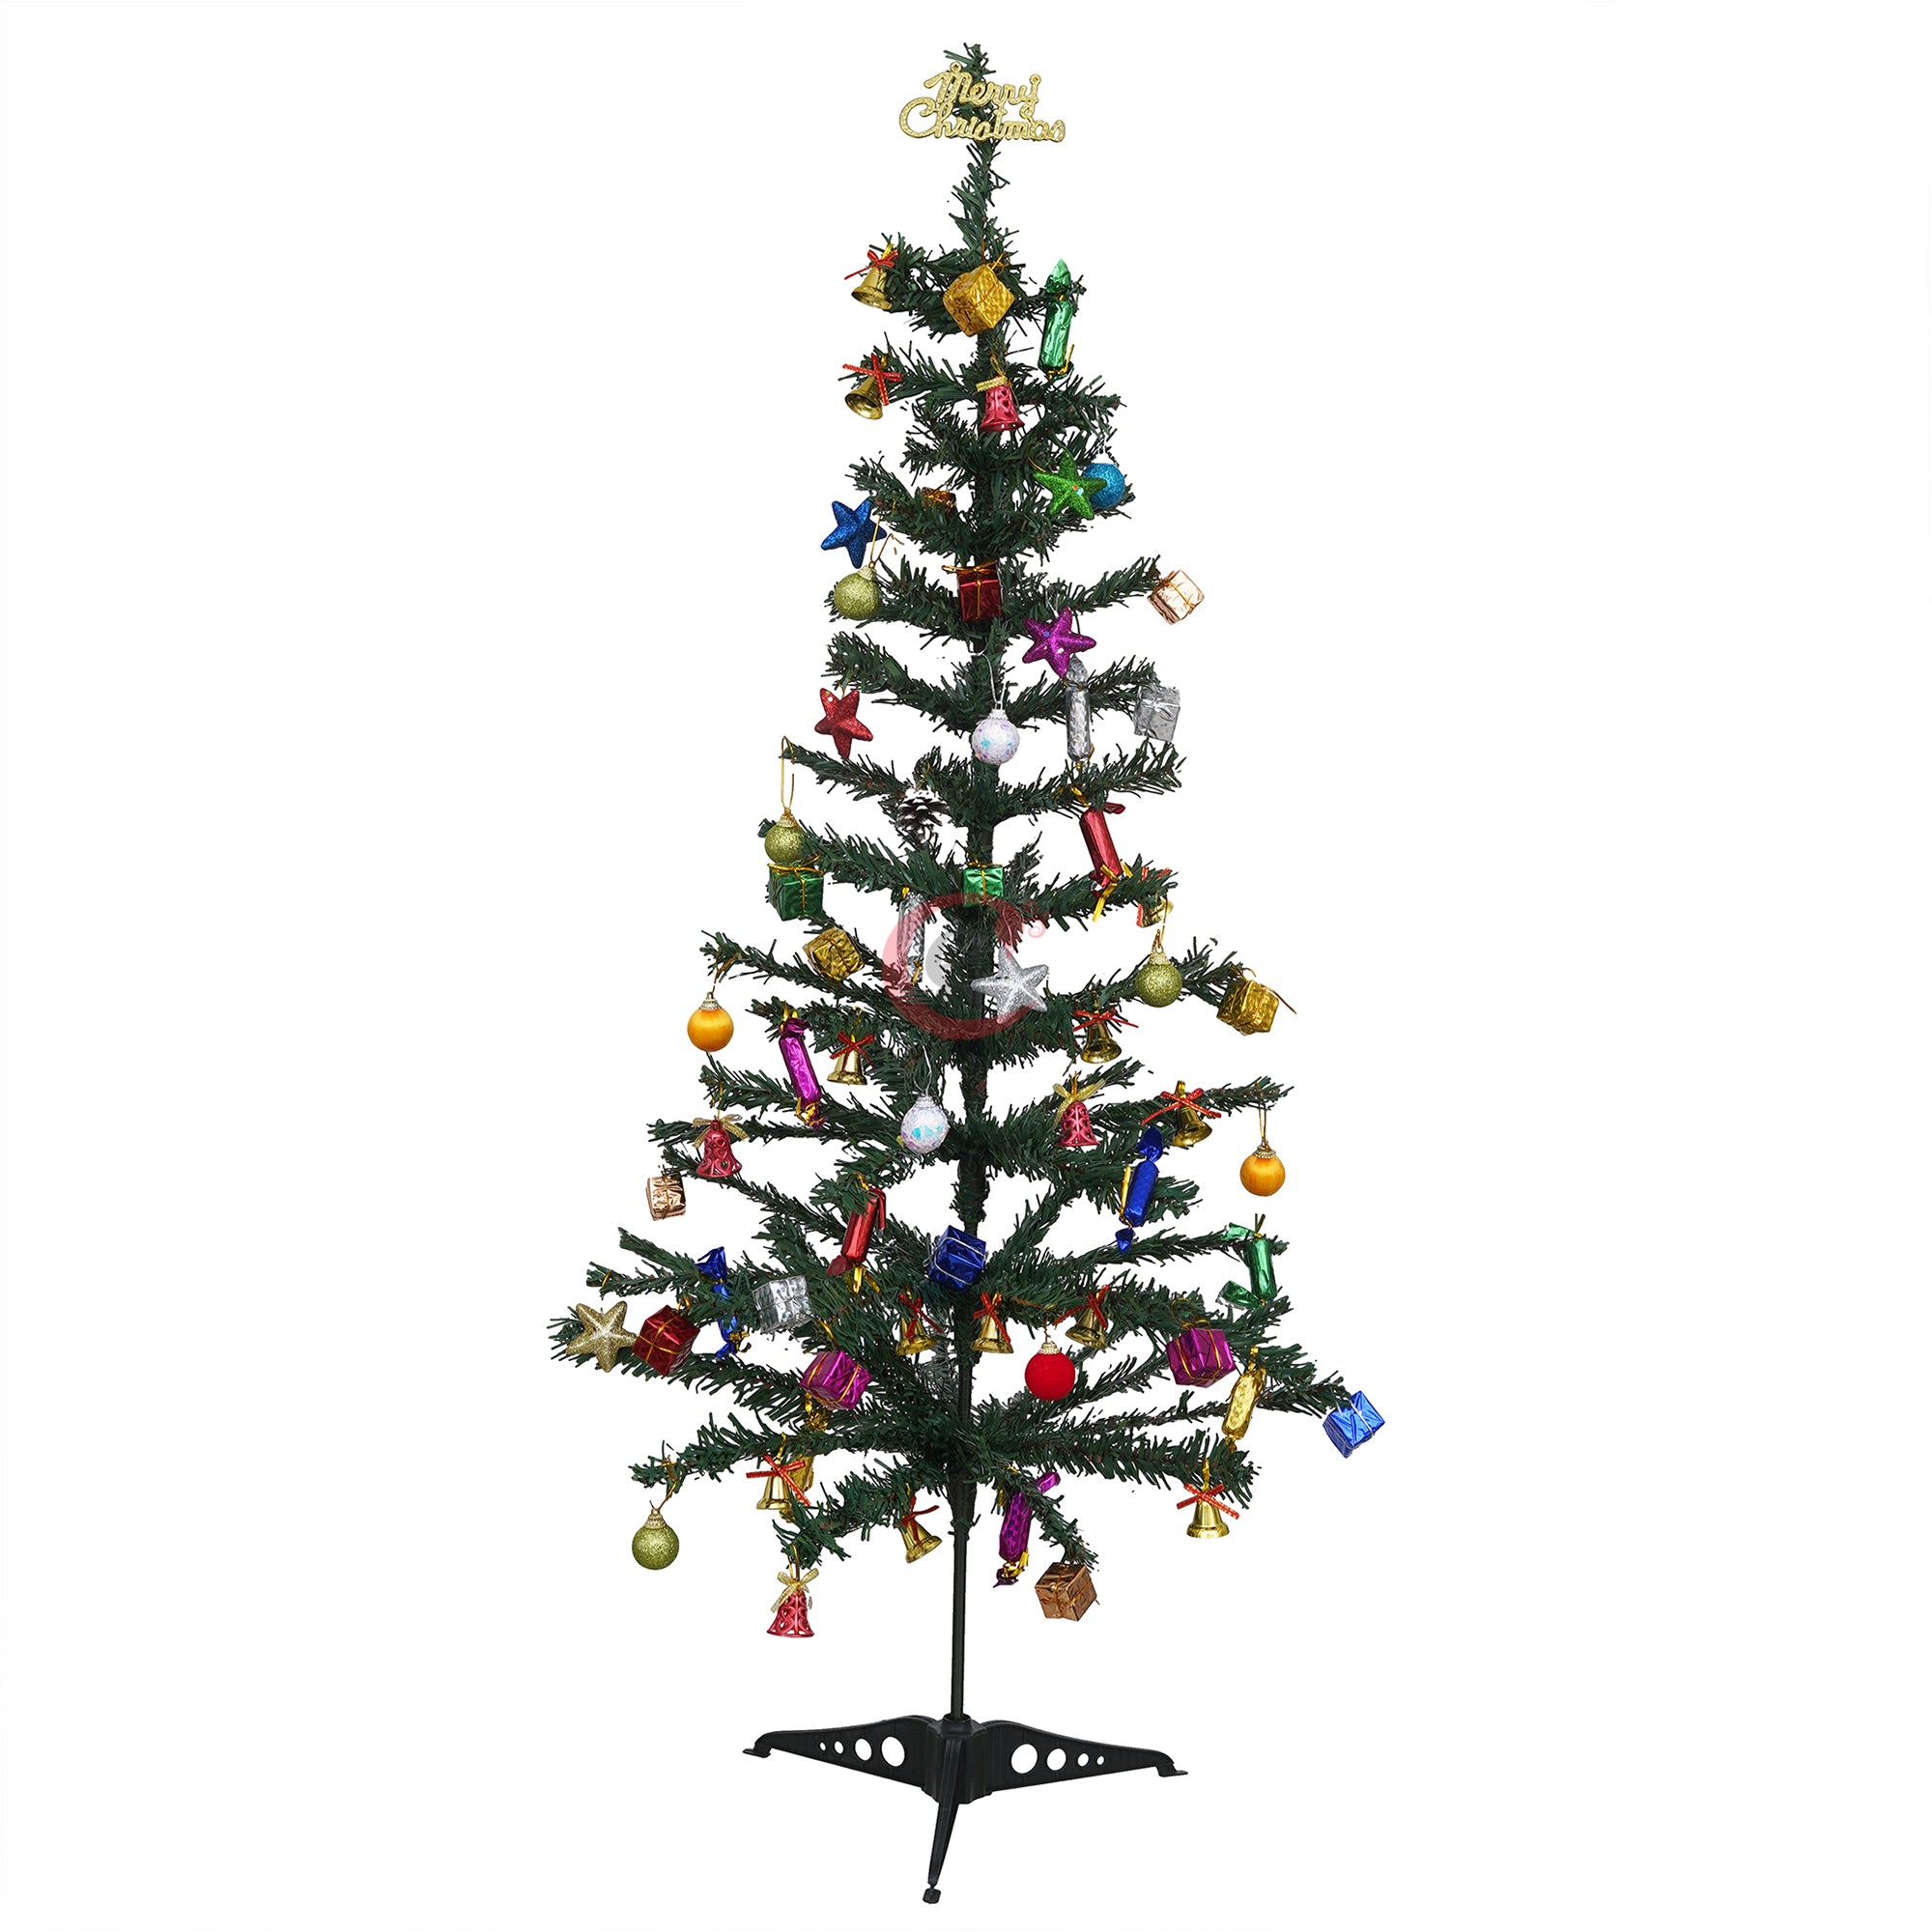 eCraftIndia 3 Feet Green Artificial Christmas Tree Xmas Pine Tree with Metal Stand - Xmas Tree for Indoor, Outdoor, Home, Living Room, Office, Church Decor - Merry Christmas Decoration Item 5